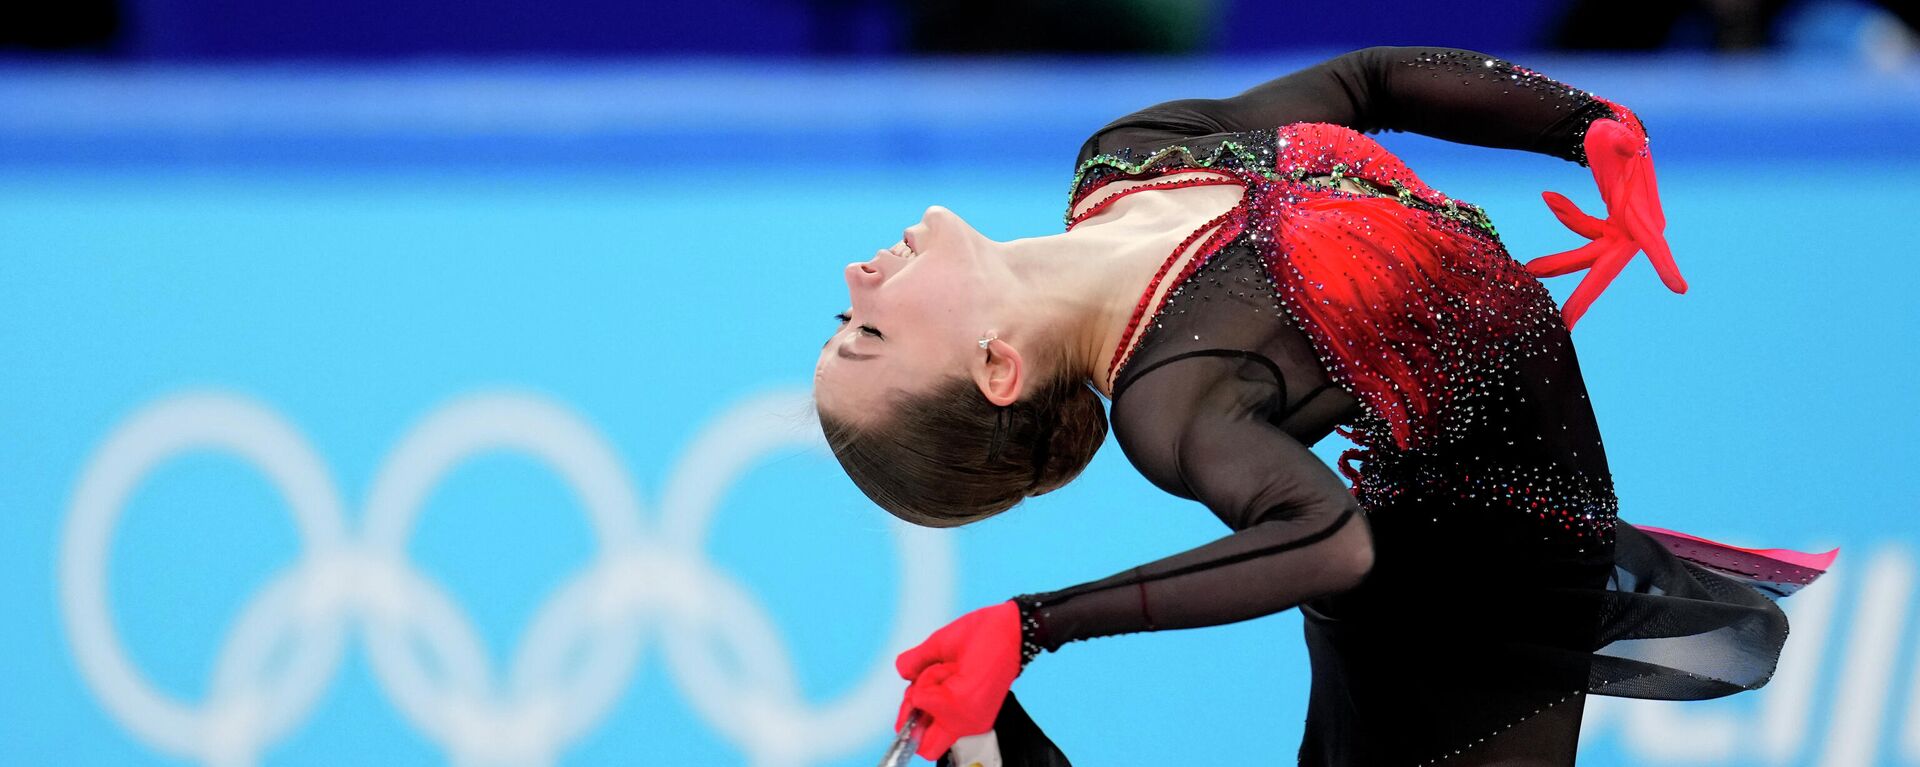 Kamila Valieva, of the Russian Olympic Committee, competes in the women's team free skate program during the figure skating competition at the 2022 Winter Olympics, Monday, Feb. 7, 2022, in Beijing. - Sputnik International, 1920, 11.07.2023